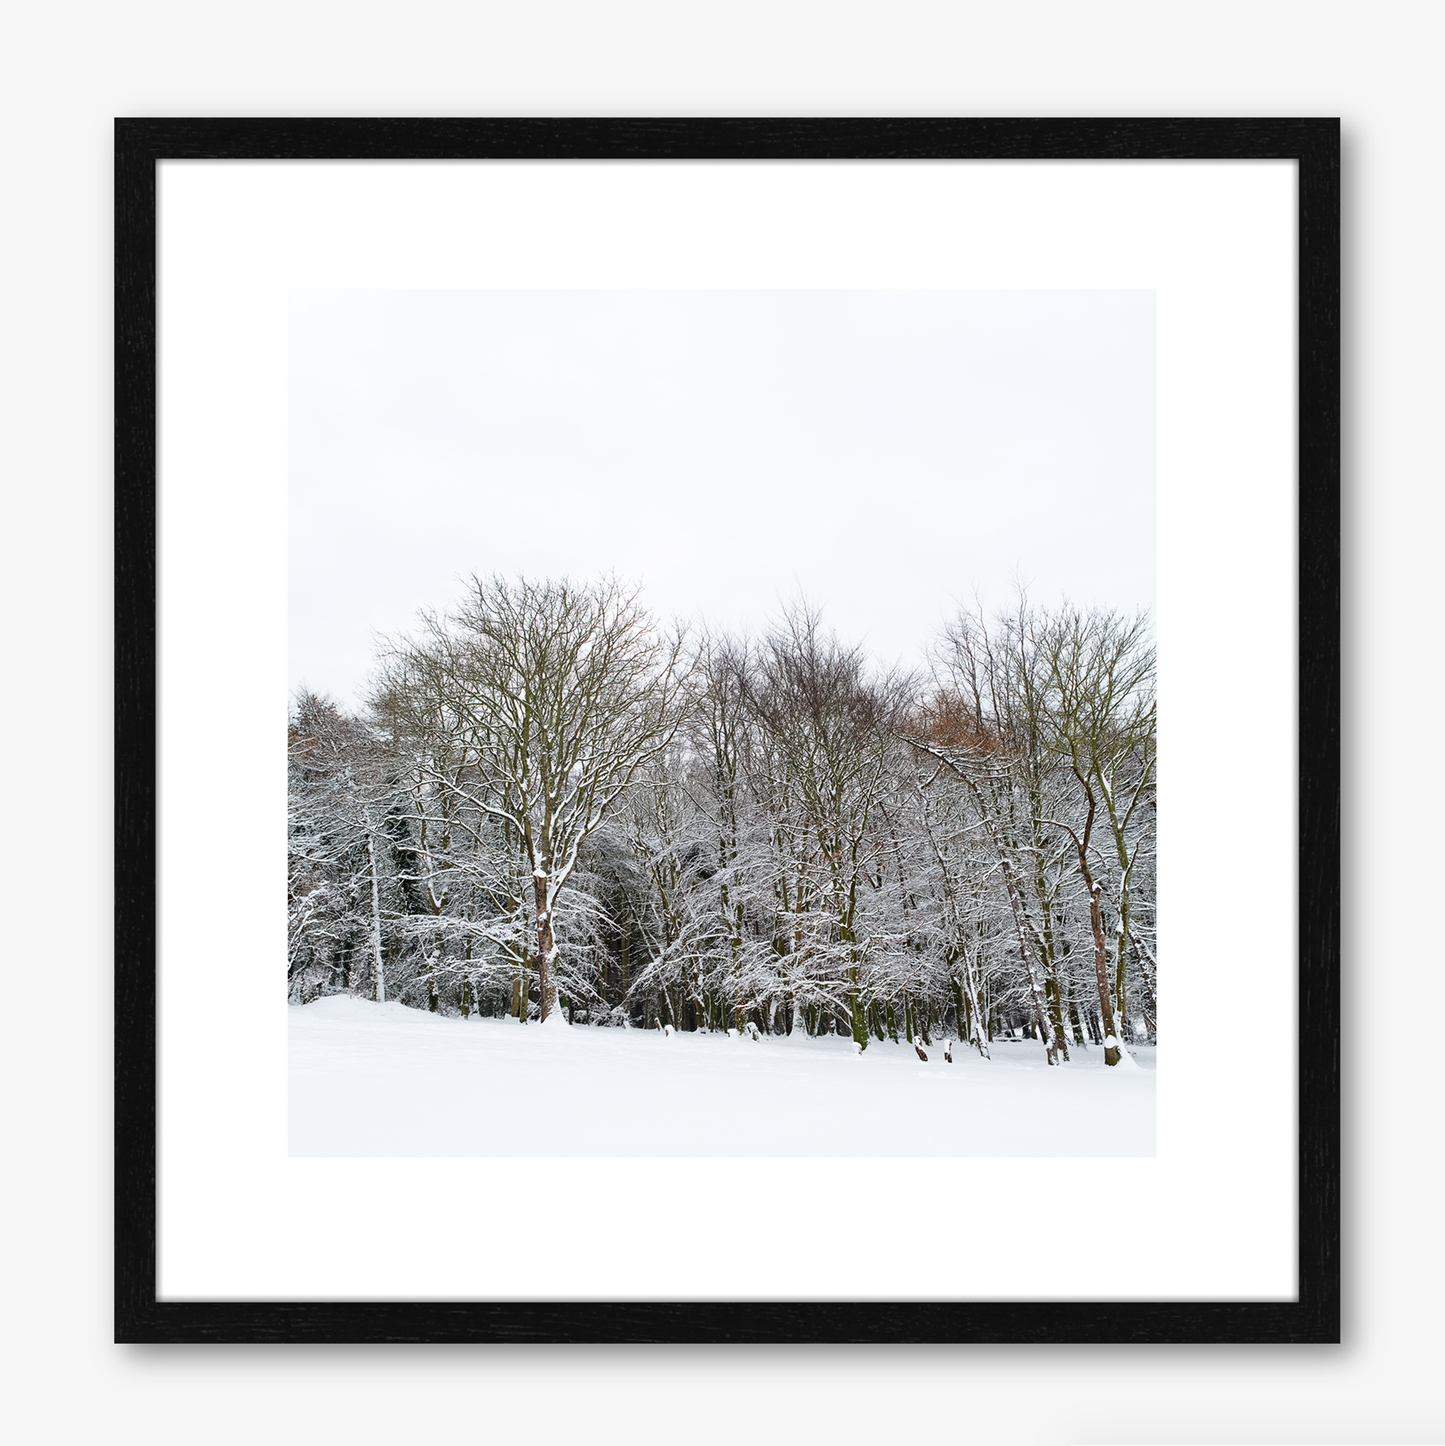 Trees With Snow